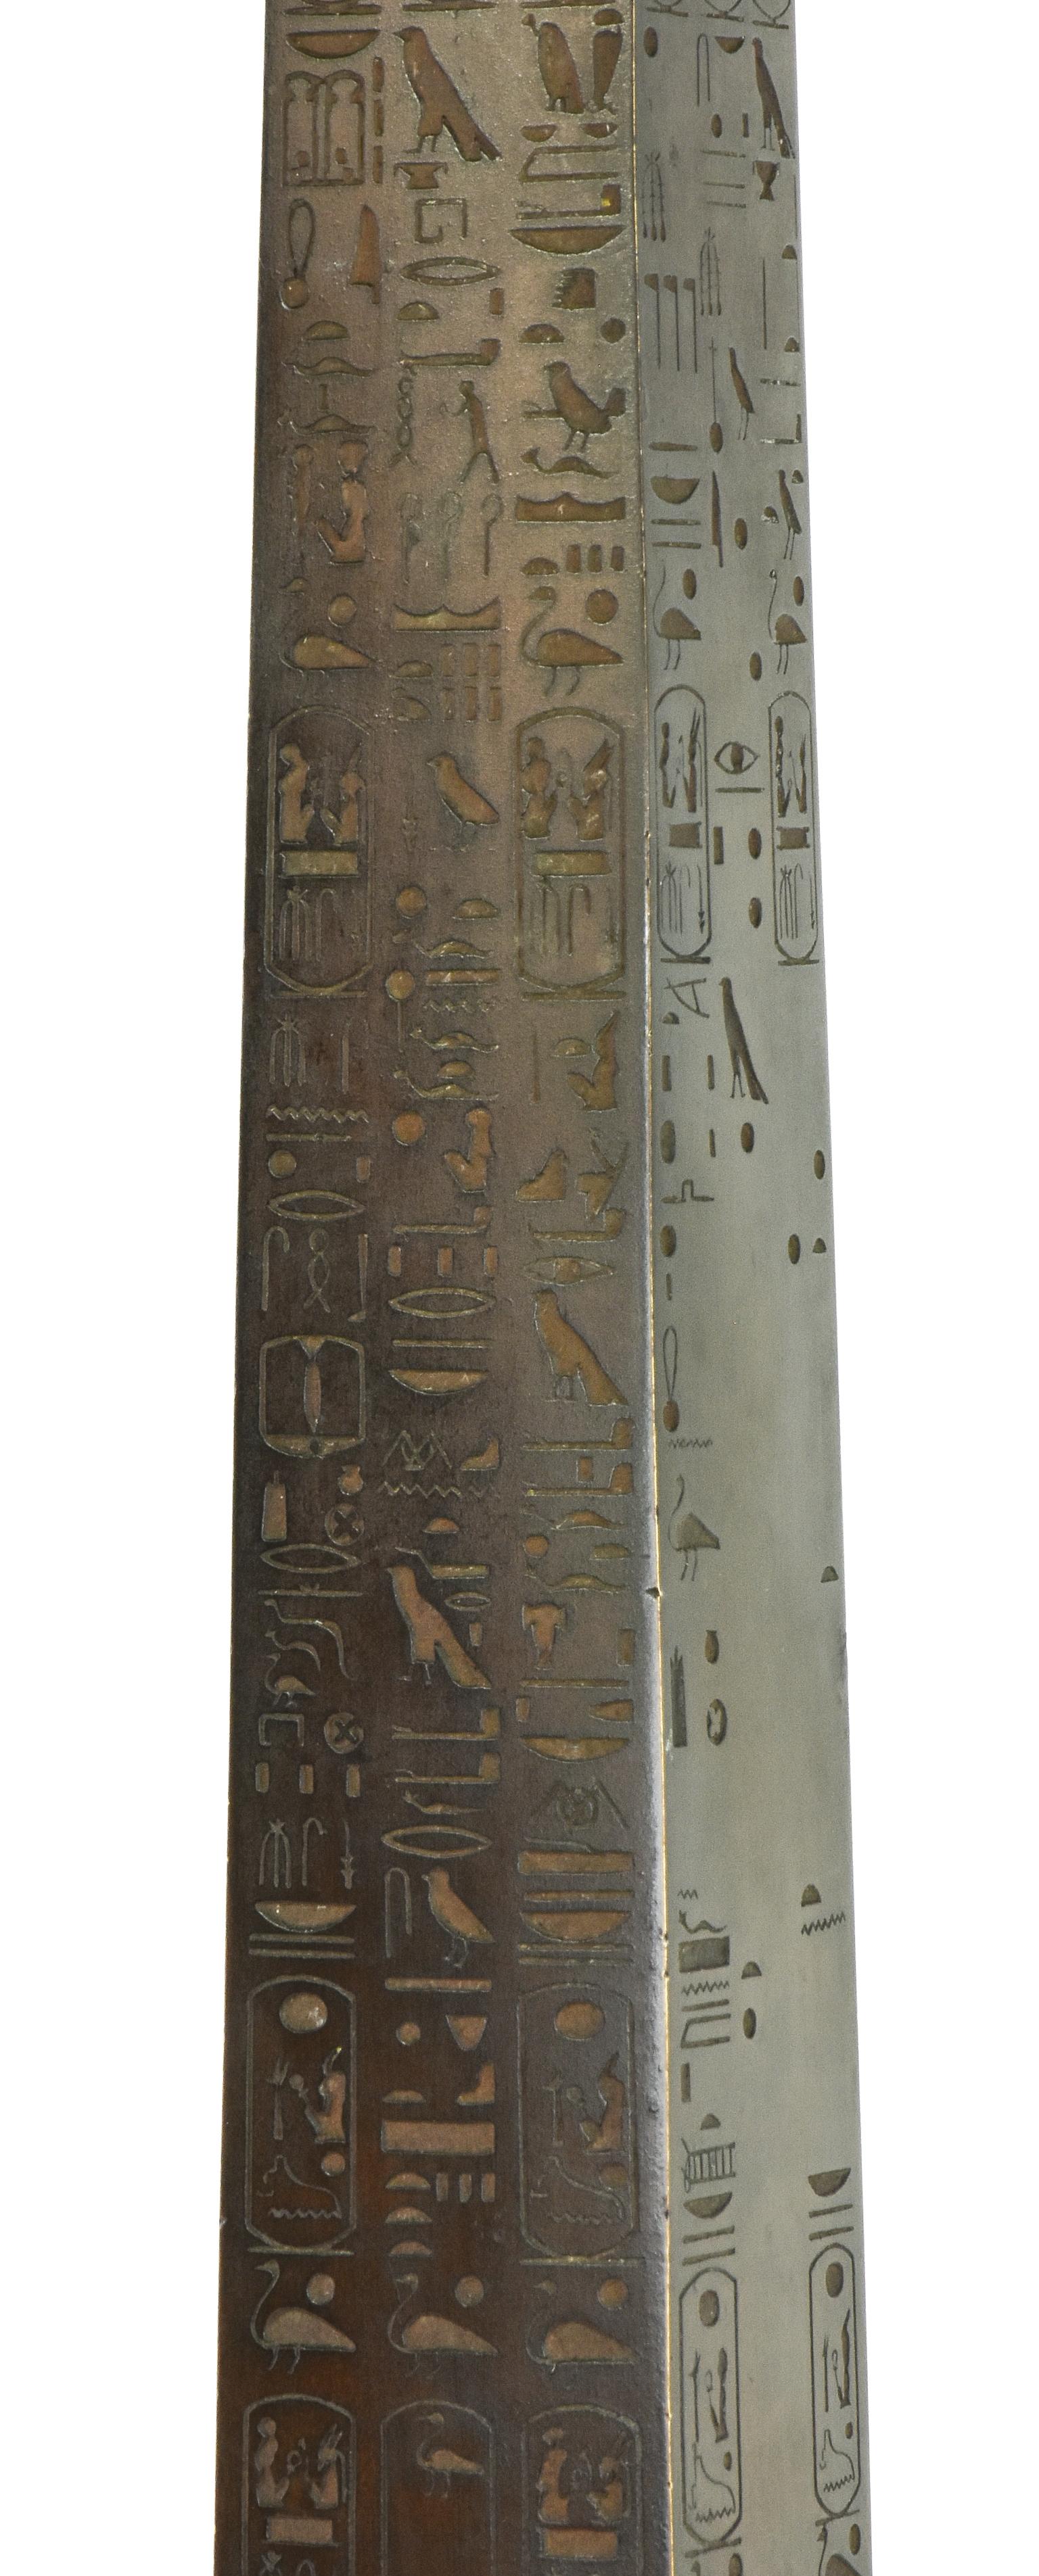 Tiffany & Co. 1881 Bronze Architectural Model of Cleopatra's Needle Obelisk, NY For Sale 2